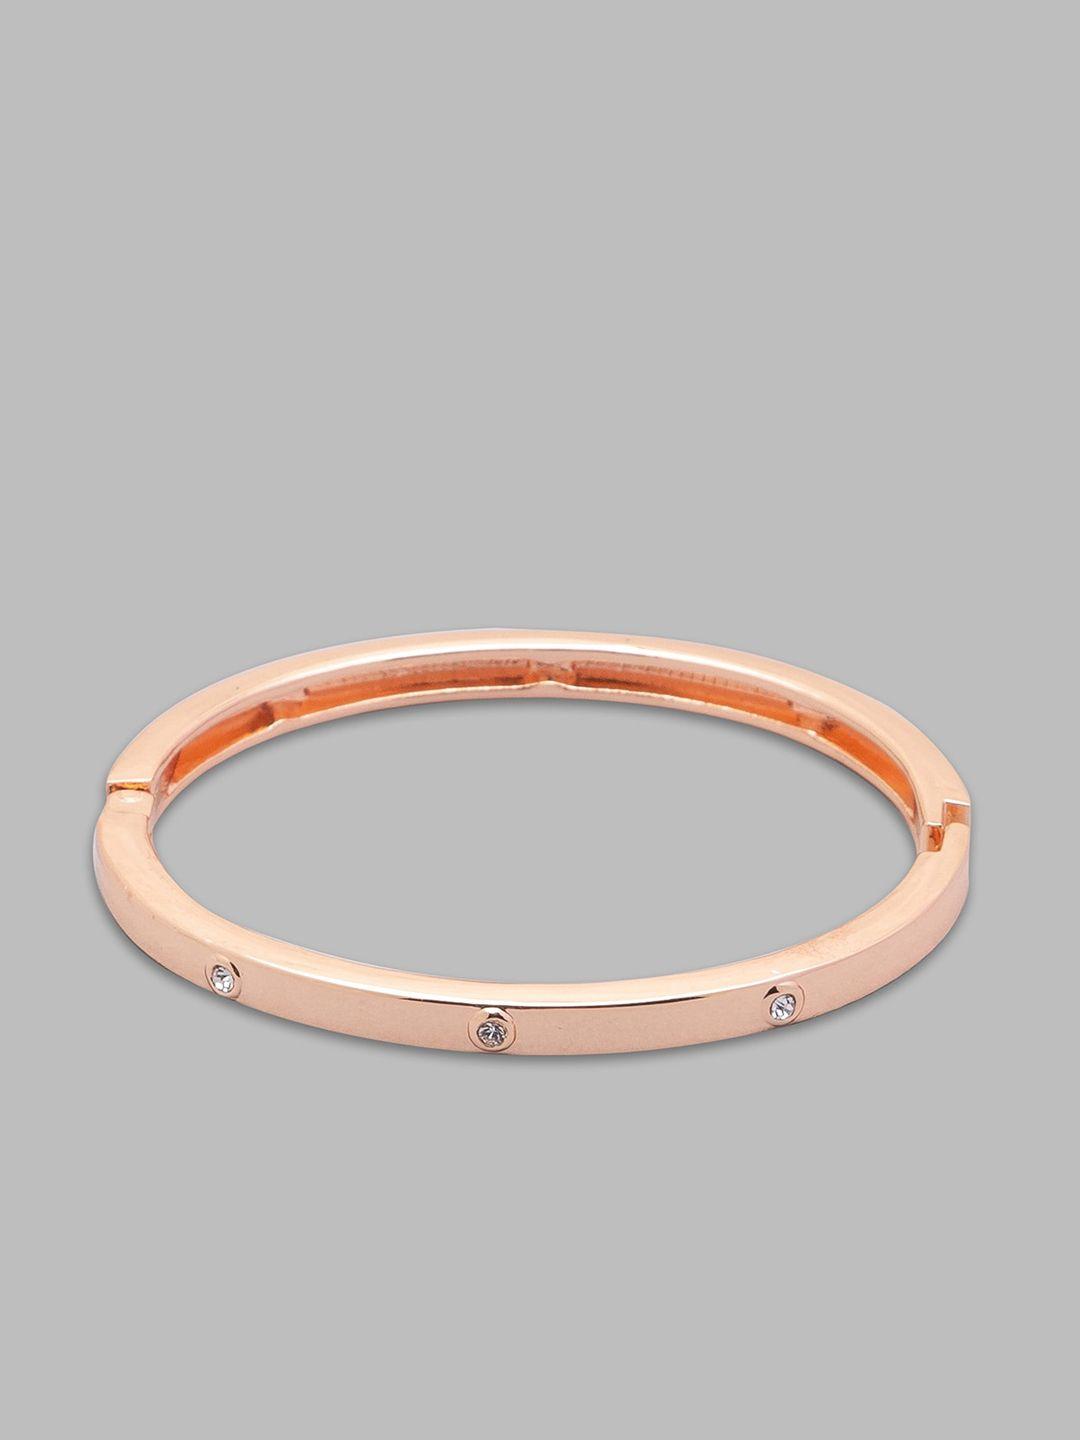 globus women white and rose gold-plated cuff bracelet